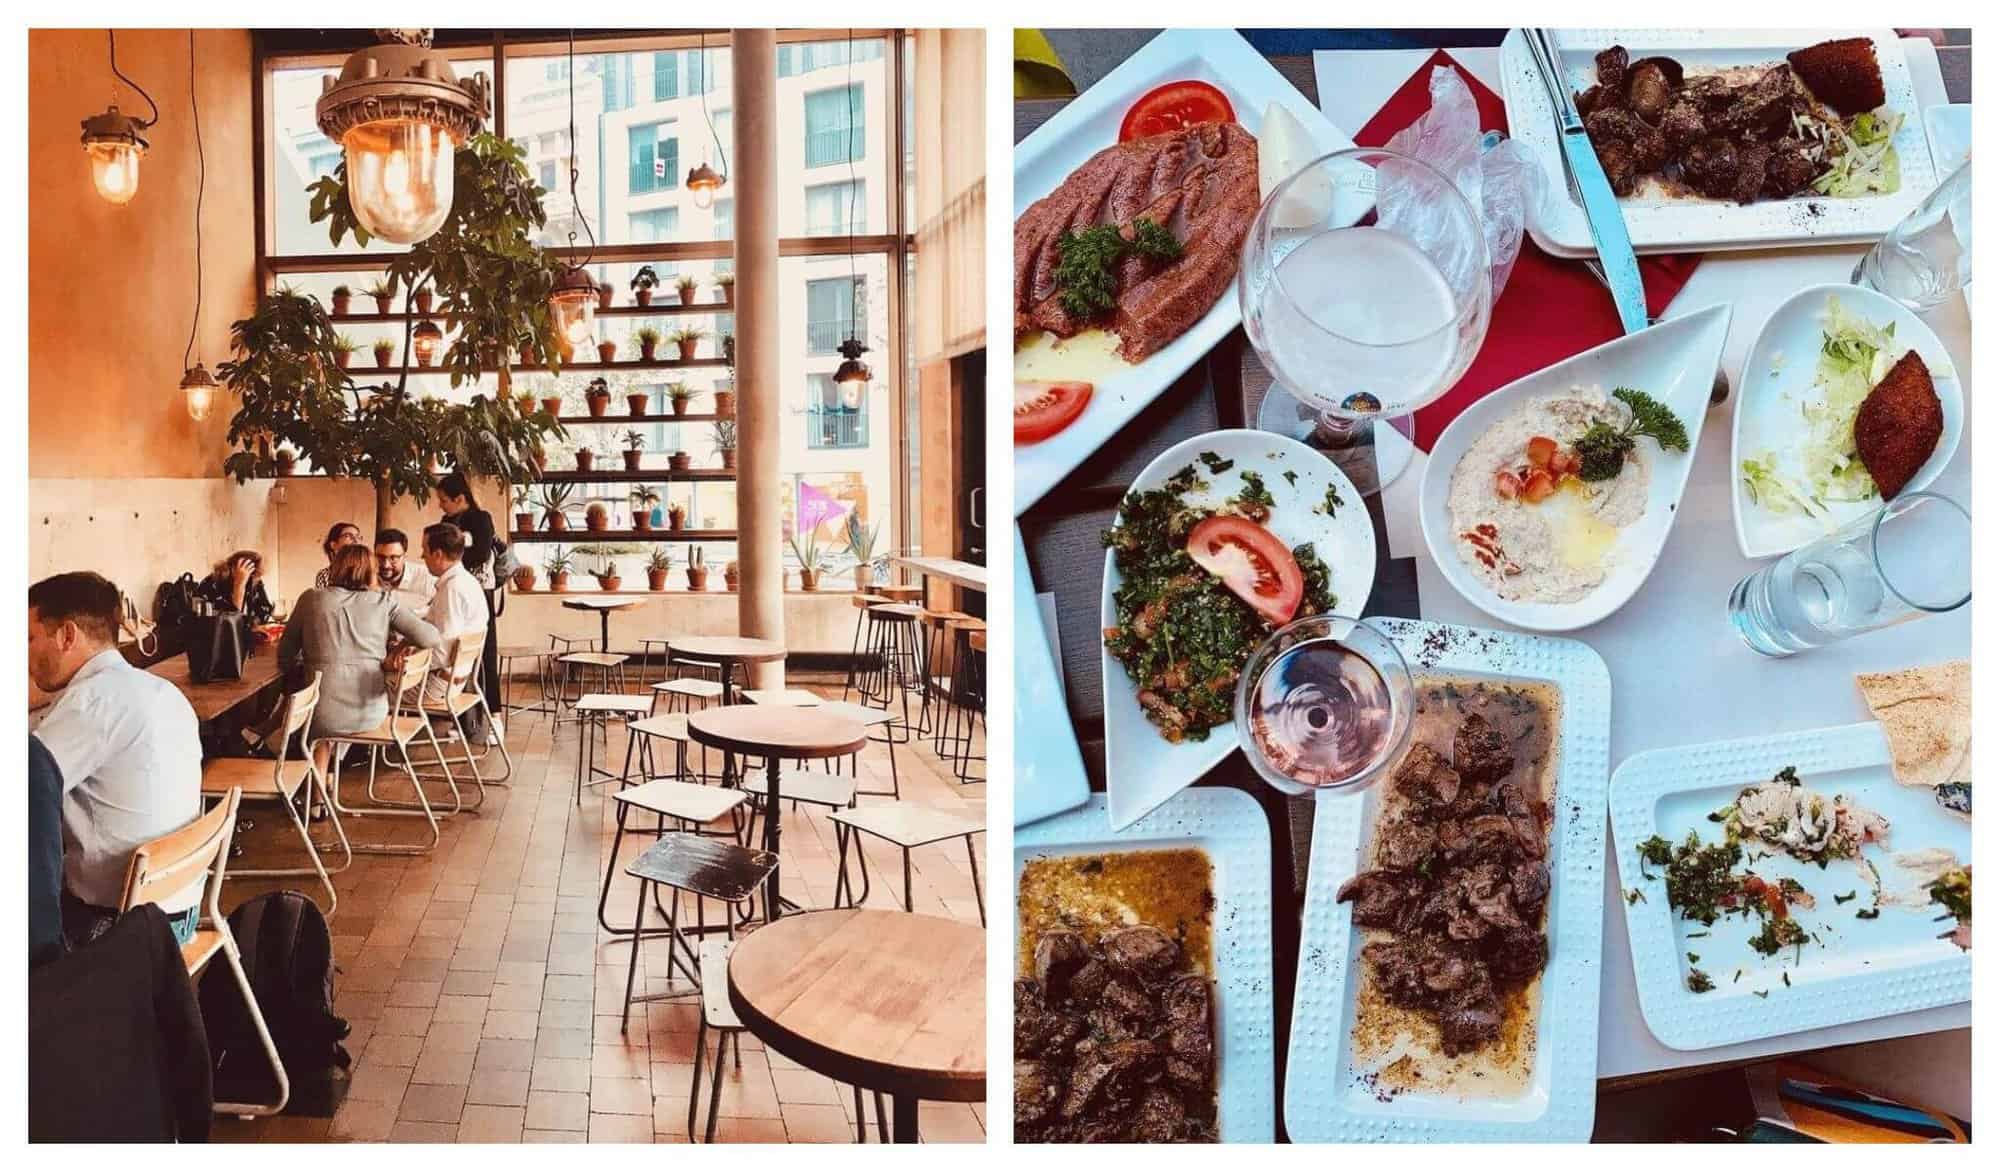 Left: Groups are gathered inside Grand Central, which is decorated with greenery and low-level lighting Right: Several colourful plates of Lebanese food are pictured from overhead at Les Vignes du Liban